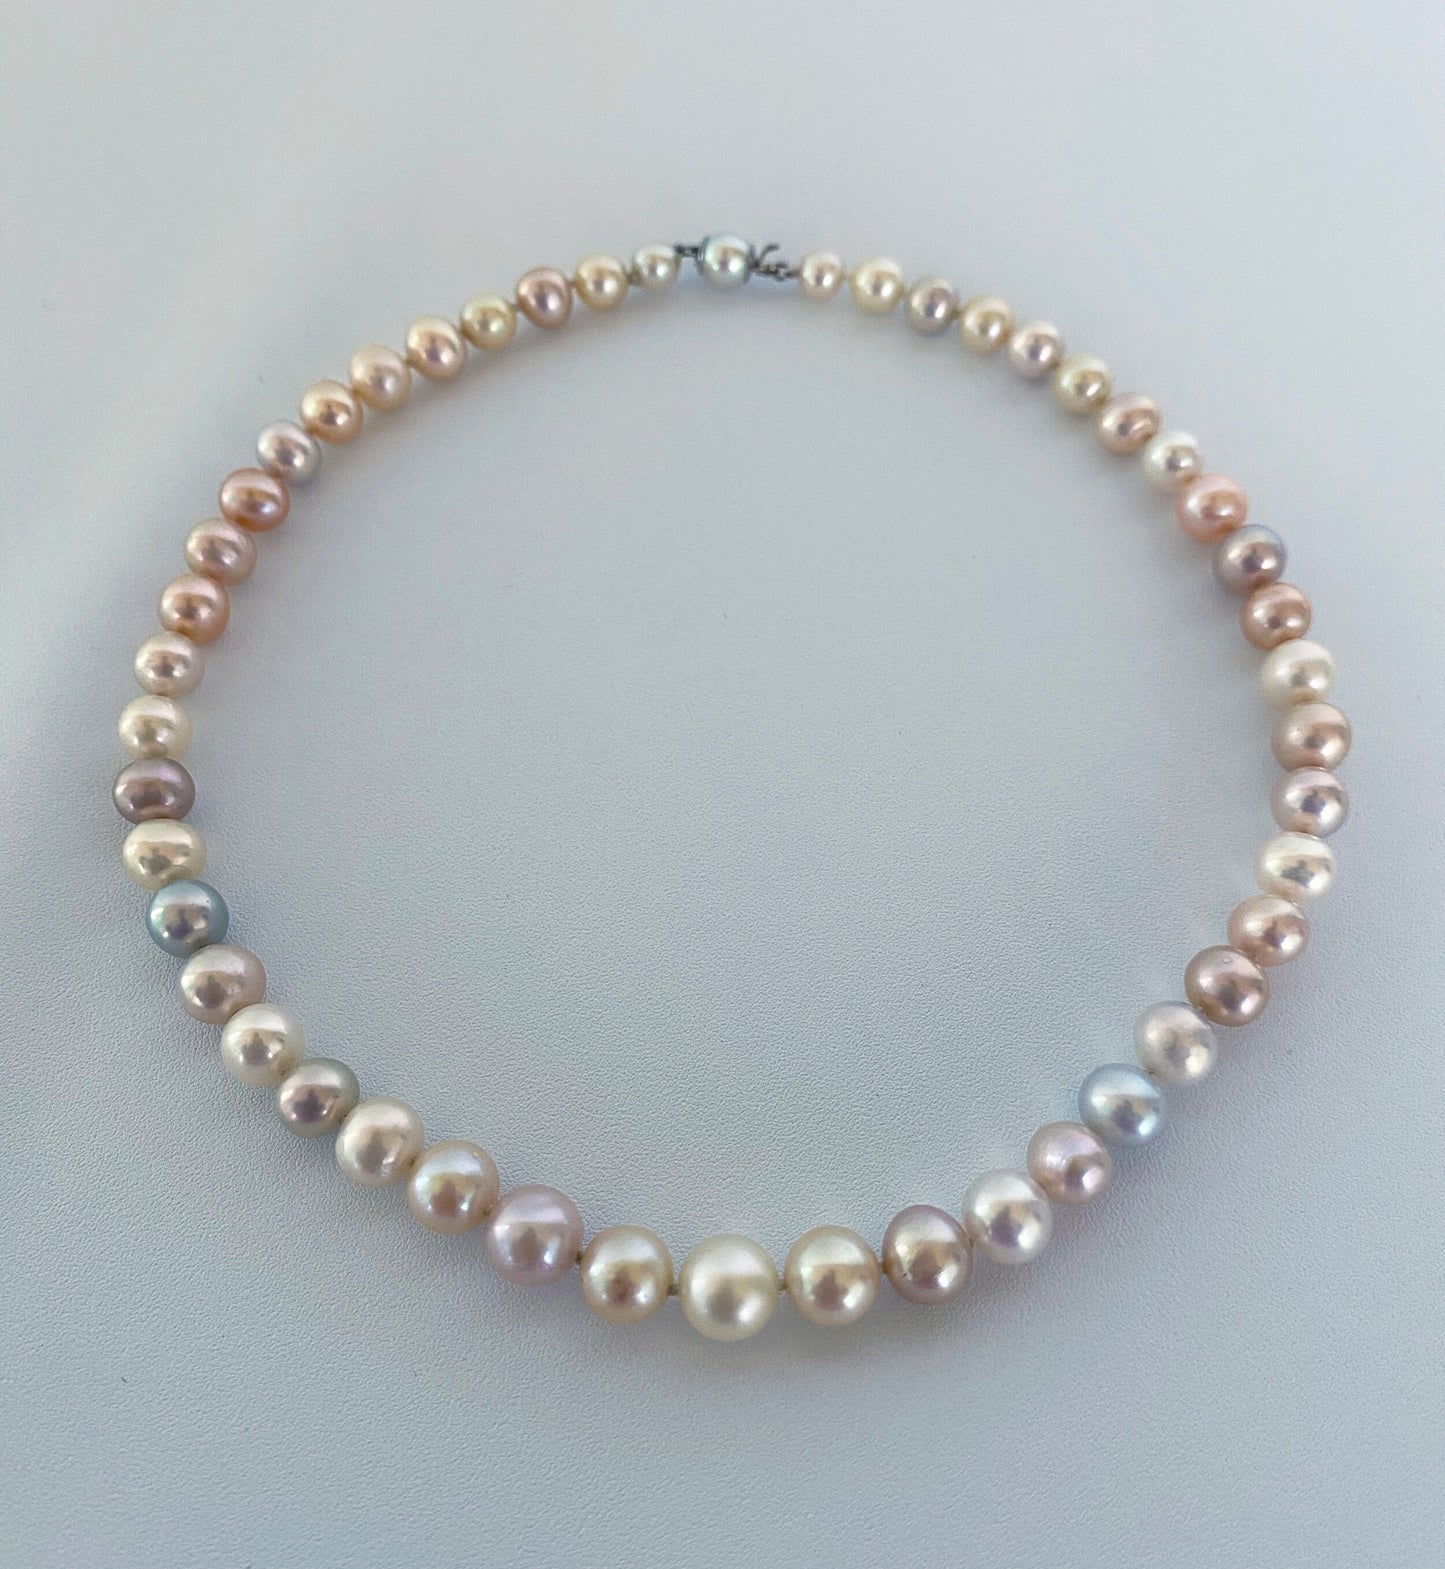 Marina J. Multi Colored Pearl Necklace with 14k White Gold Clasp